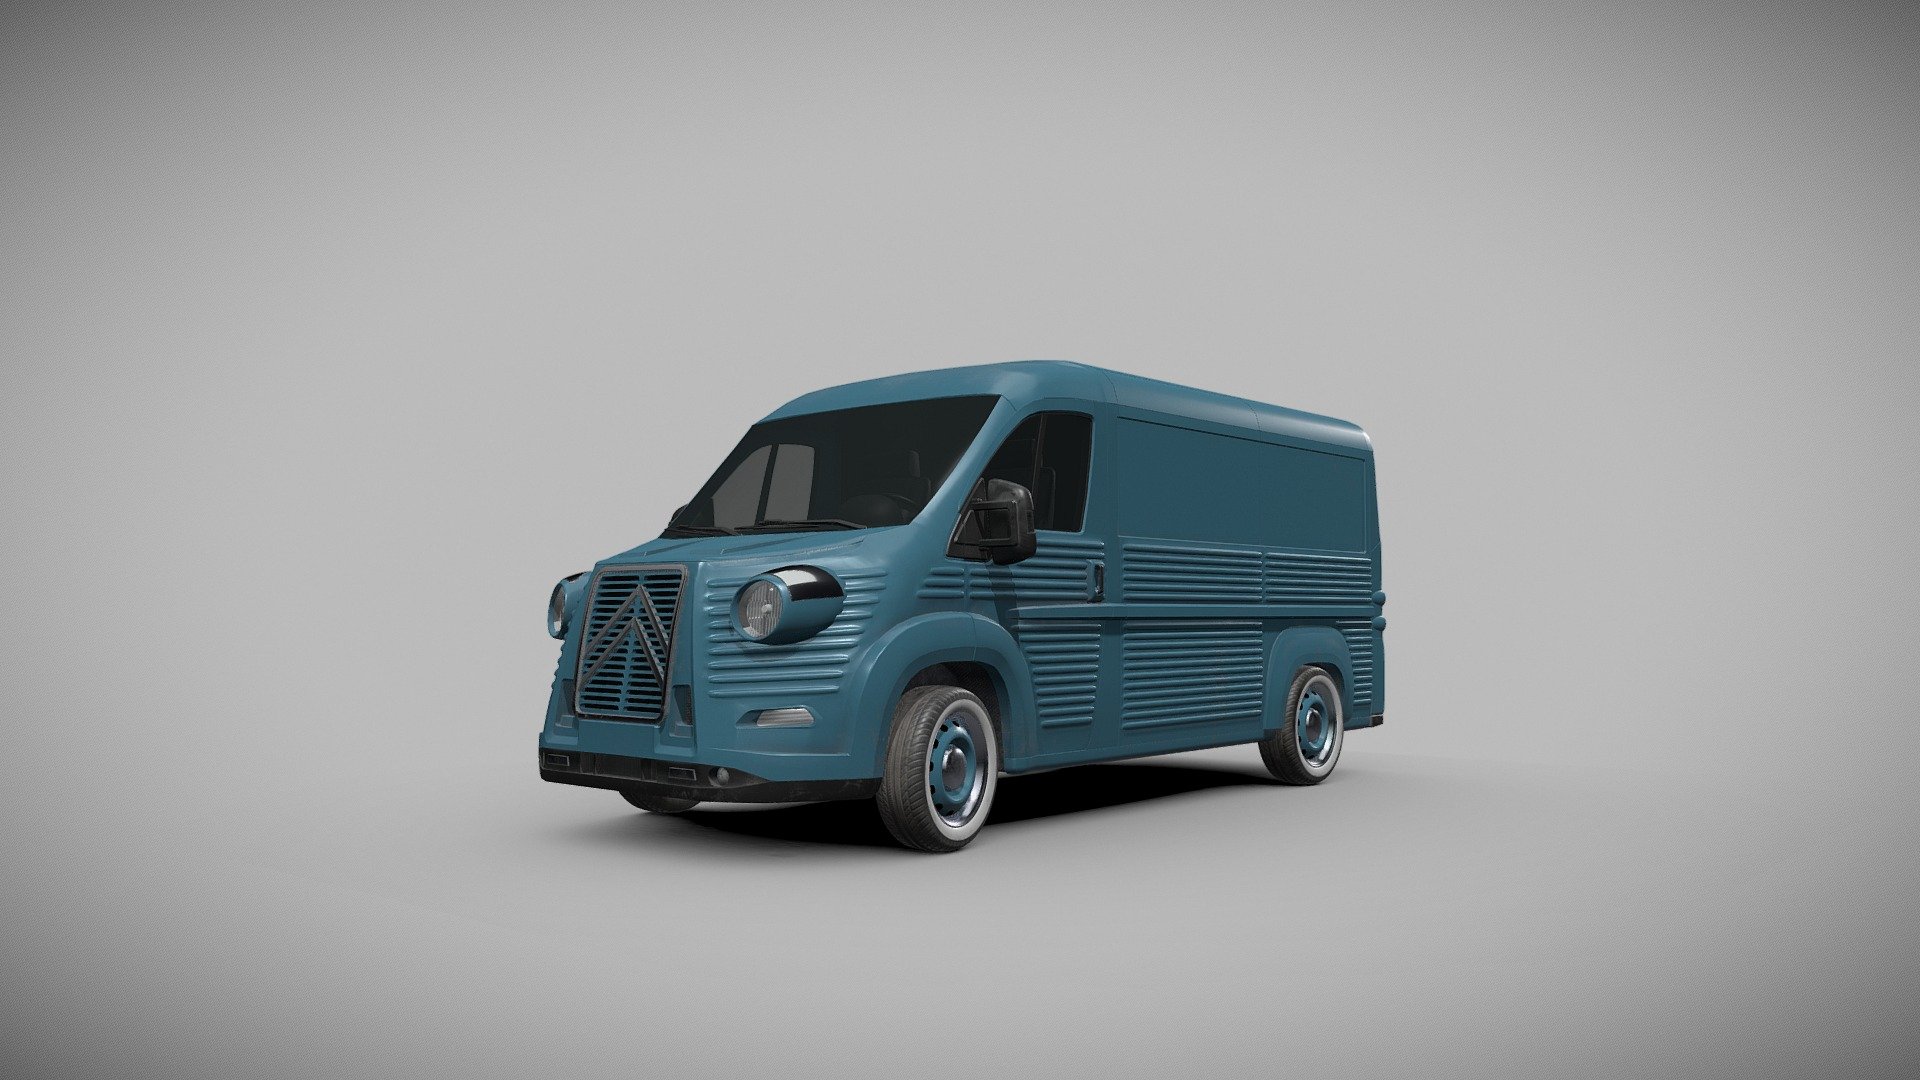 The Type H 70th Anniversary Van 
A tribute to designer Flaminio Bertoni and his Citroën HY unveiled exactly 70 years ago, this is a contemporary reinvention of the legendary van, packaged as a complete car kit and developed on the Citroën Jumper chassis.

I've used this model as a prop hero in one of my Unreal Engine projects and you can check it out using the link bellow:

https://www.artstation.com/artwork/035Vee - Citroën Type H 70th Anniversary - 3D model by Cristian Rus (@CristianRus) 3d model